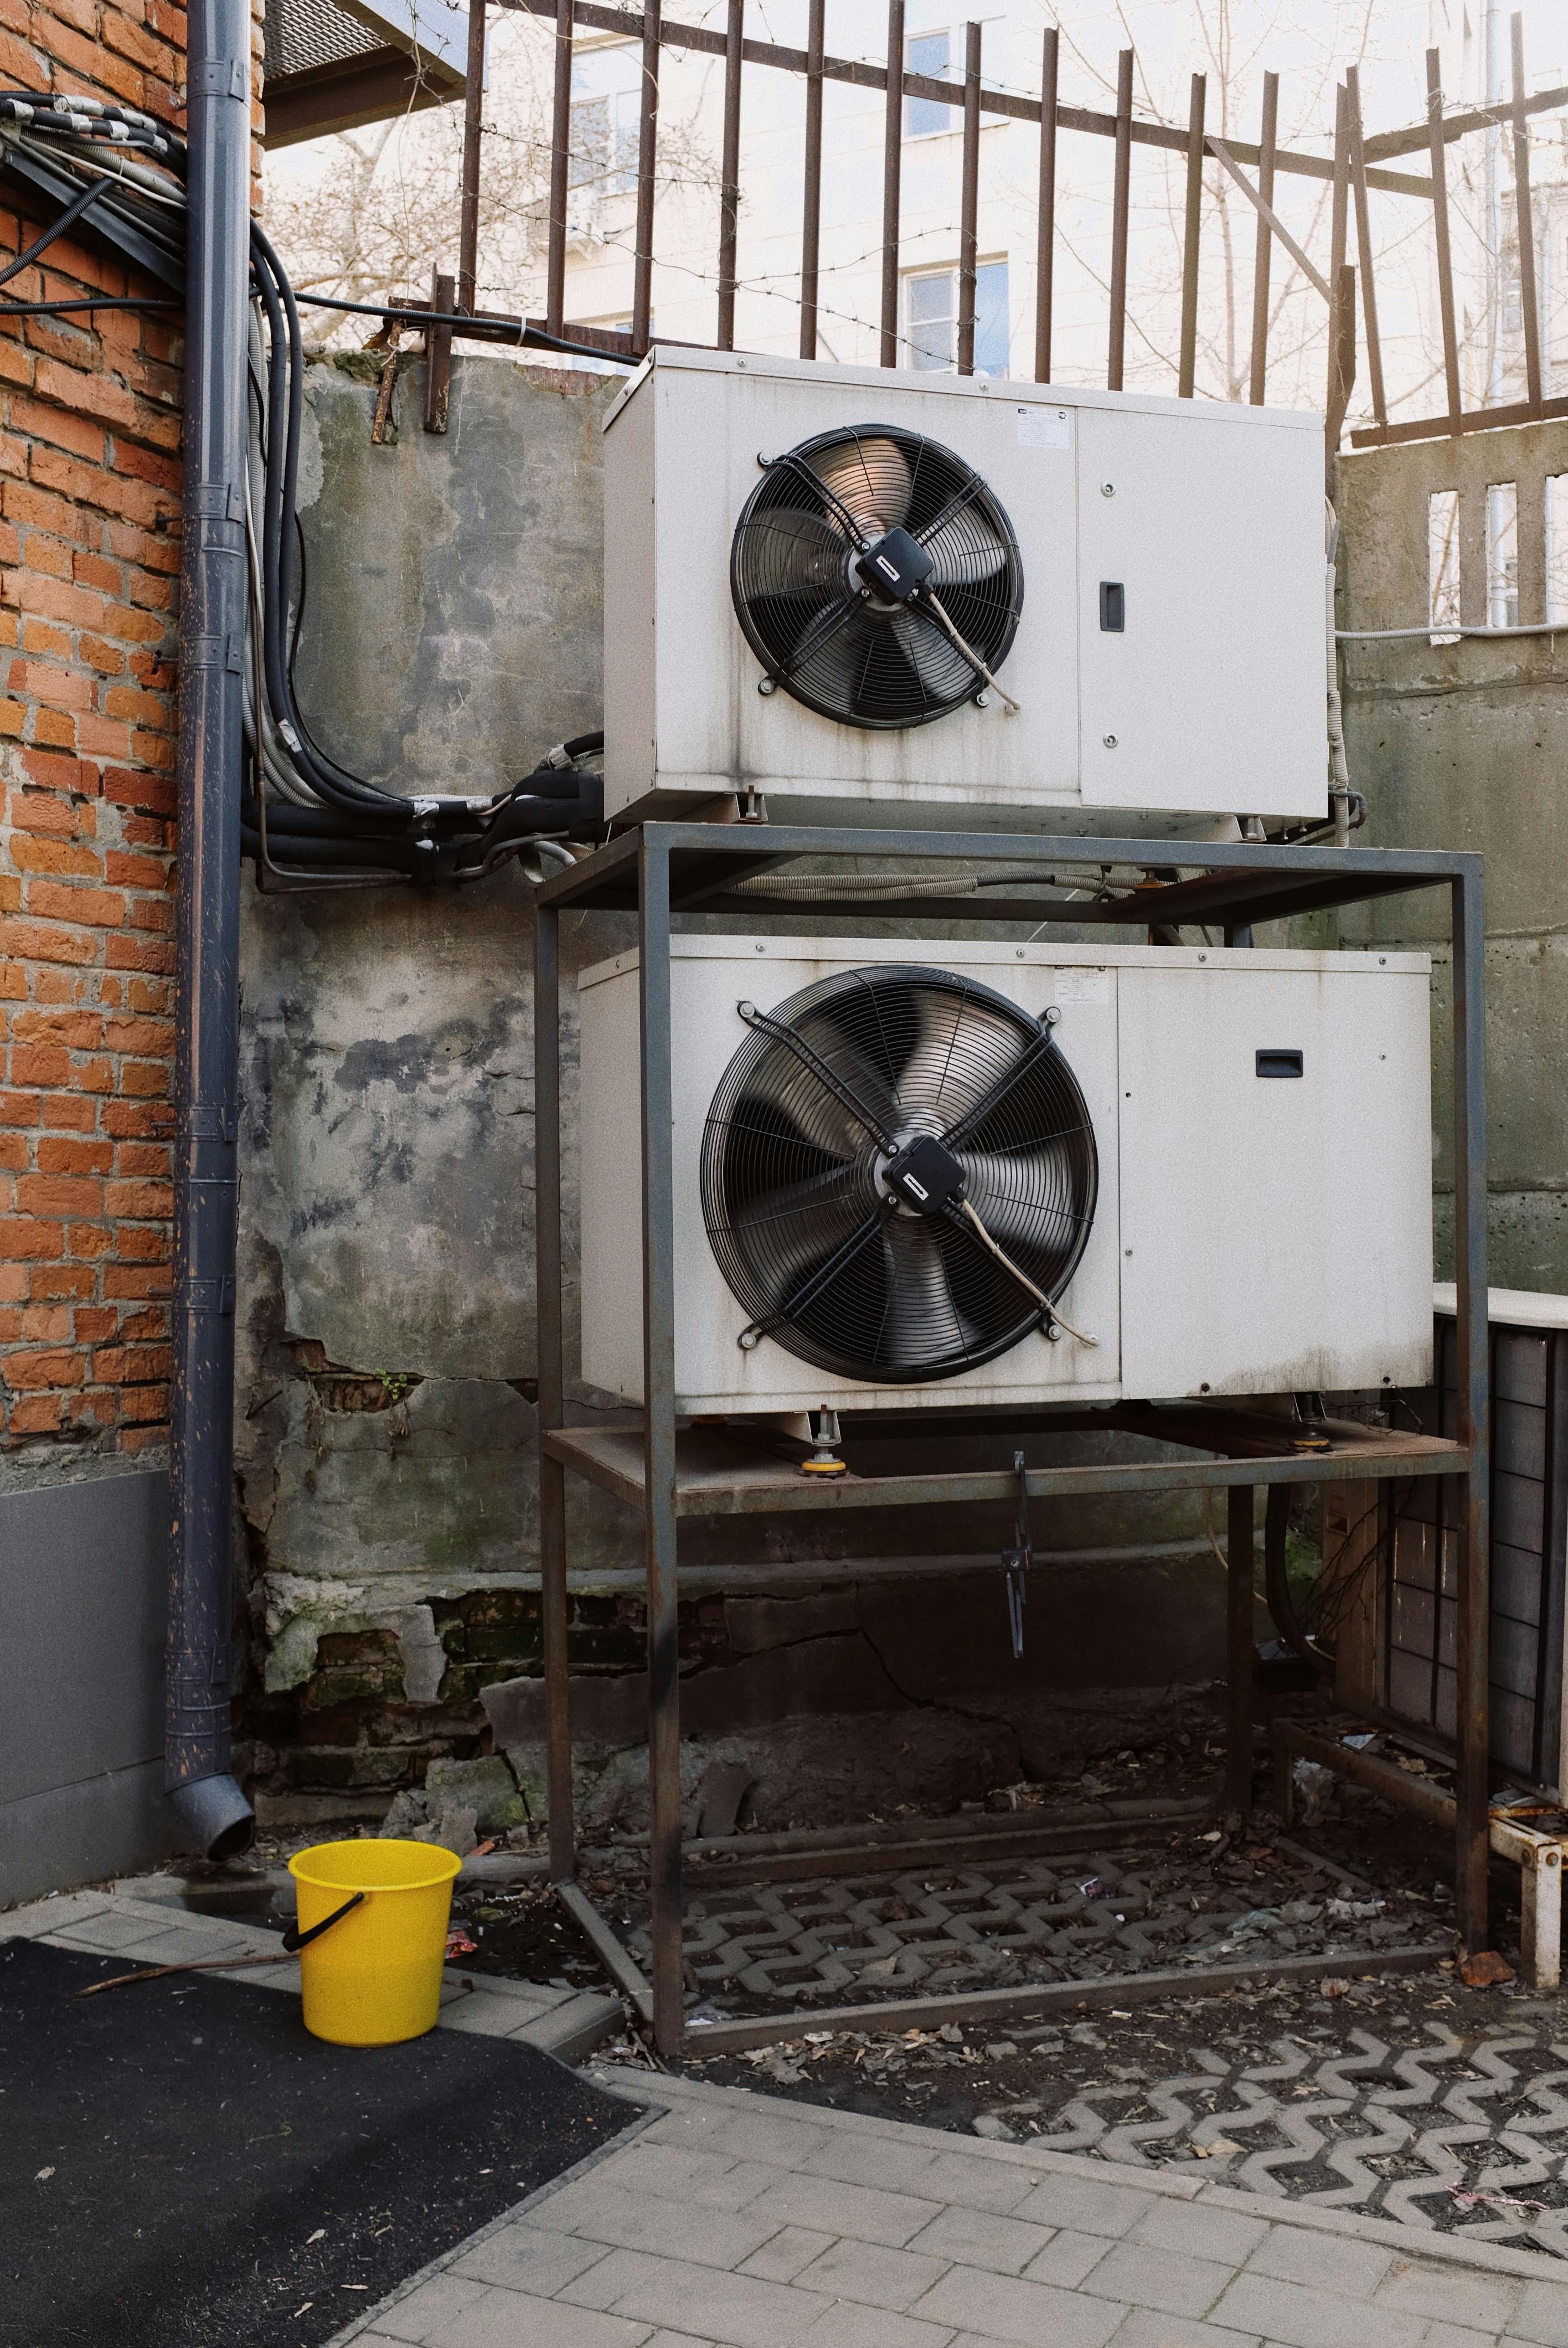 Your reliable and solid commercial HVAC solution